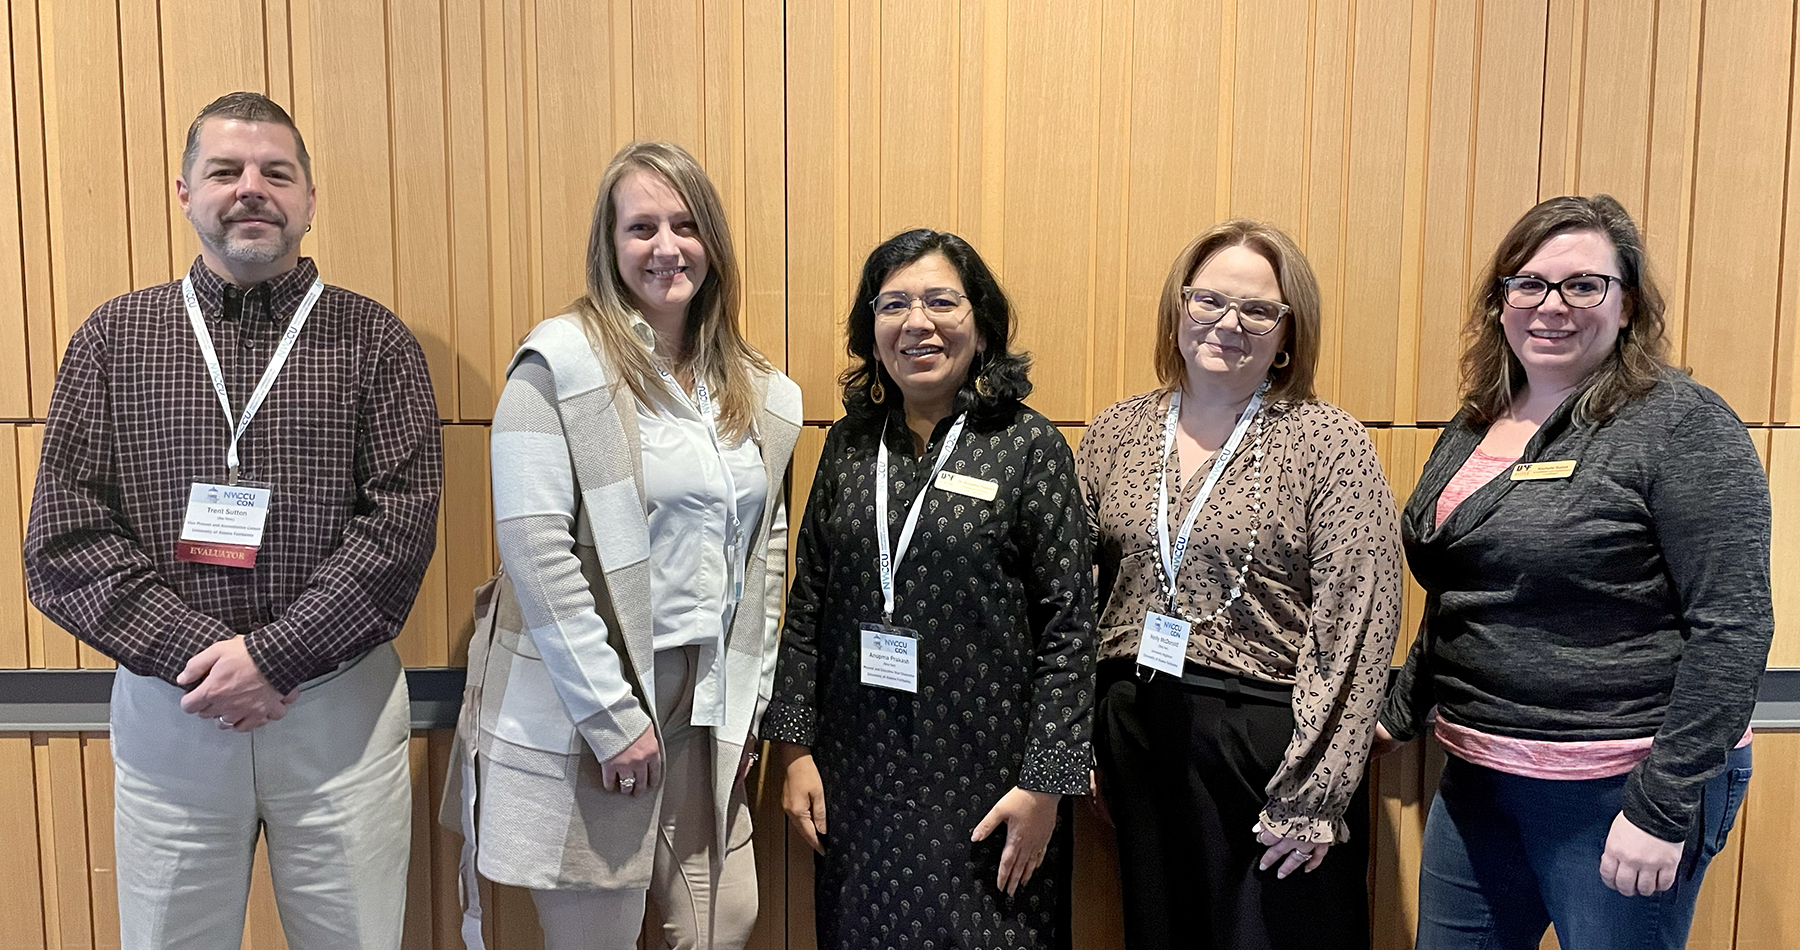 UAF members in attendance at the 2023 NWCCU annual conference. From left to right Trent Sutton, vice provost and ALO; Jenn Pedersen, executive director of CTL; Anupma Prakash, provost and executive vice chancellor; Holly McDonald, registrar; and Rochelle Rodak, accreditation and assessment coordinator.